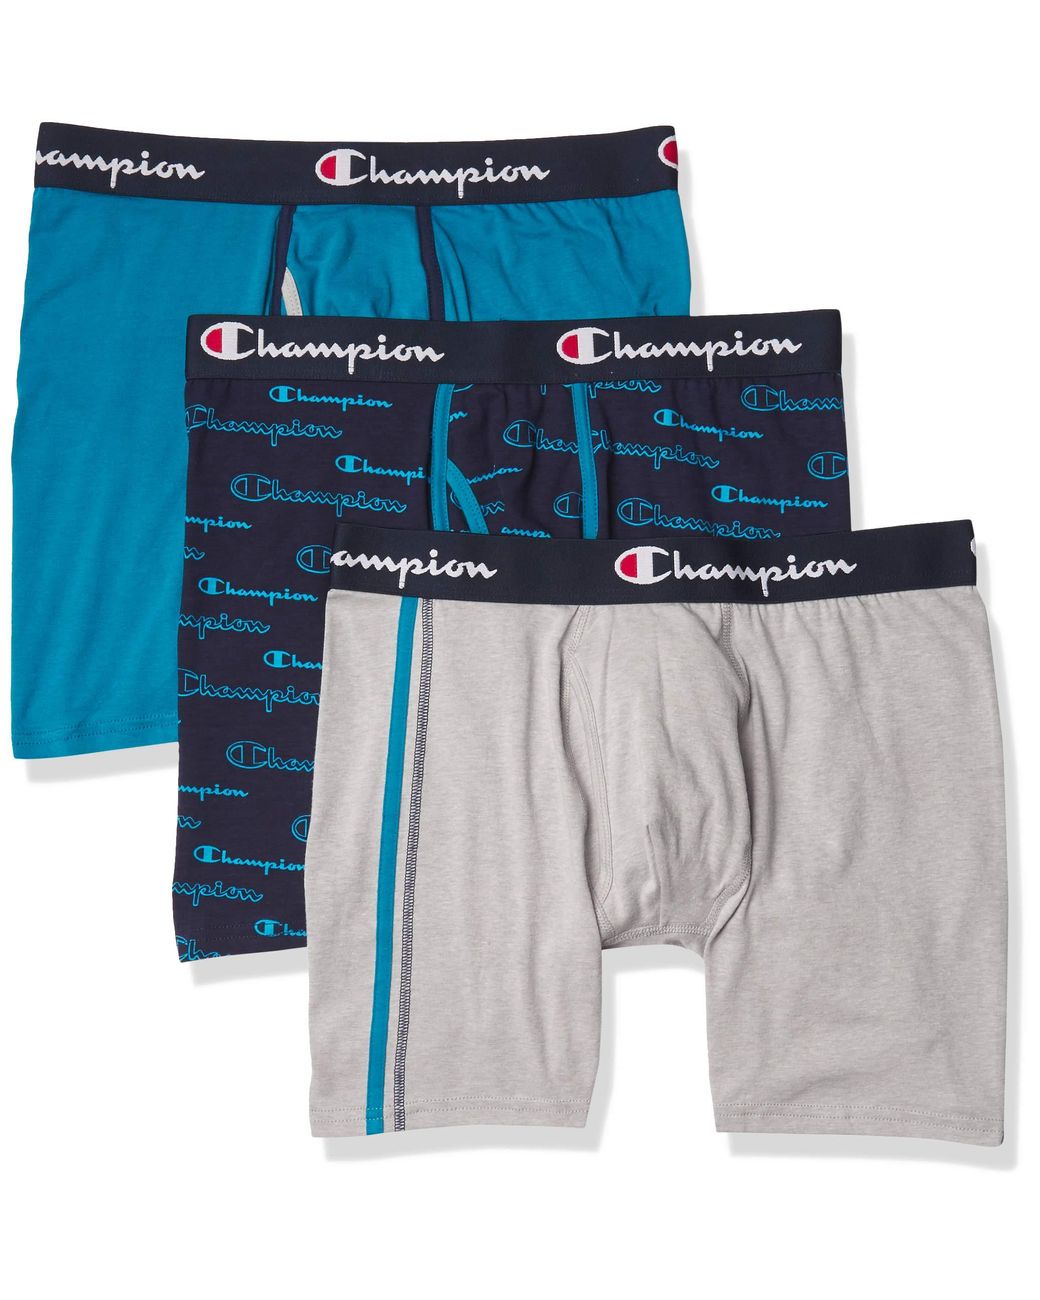 Champion Everyday Comfort Cotton Stretch Boxer Briefs 3-pack in Black ...